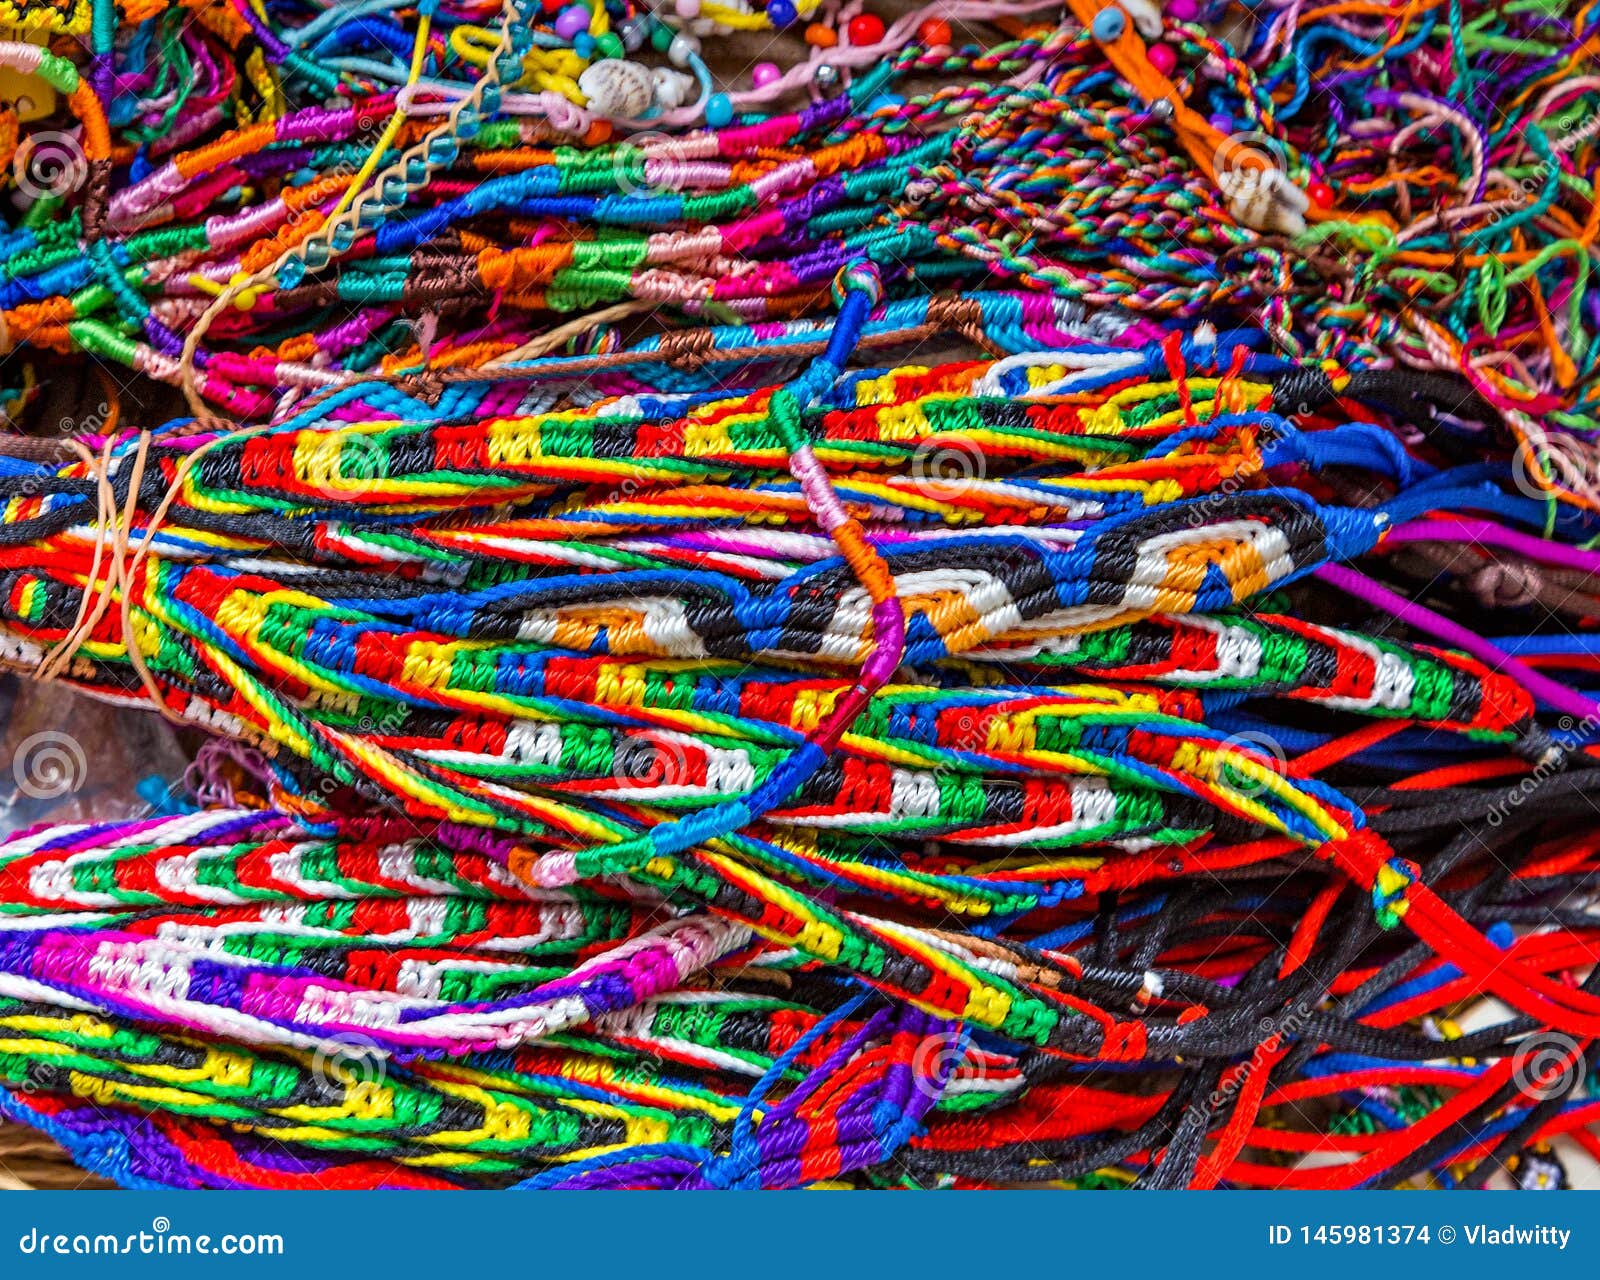 176 Lucky Rope Bracelet Images, Stock Photos, 3D objects, & Vectors |  Shutterstock